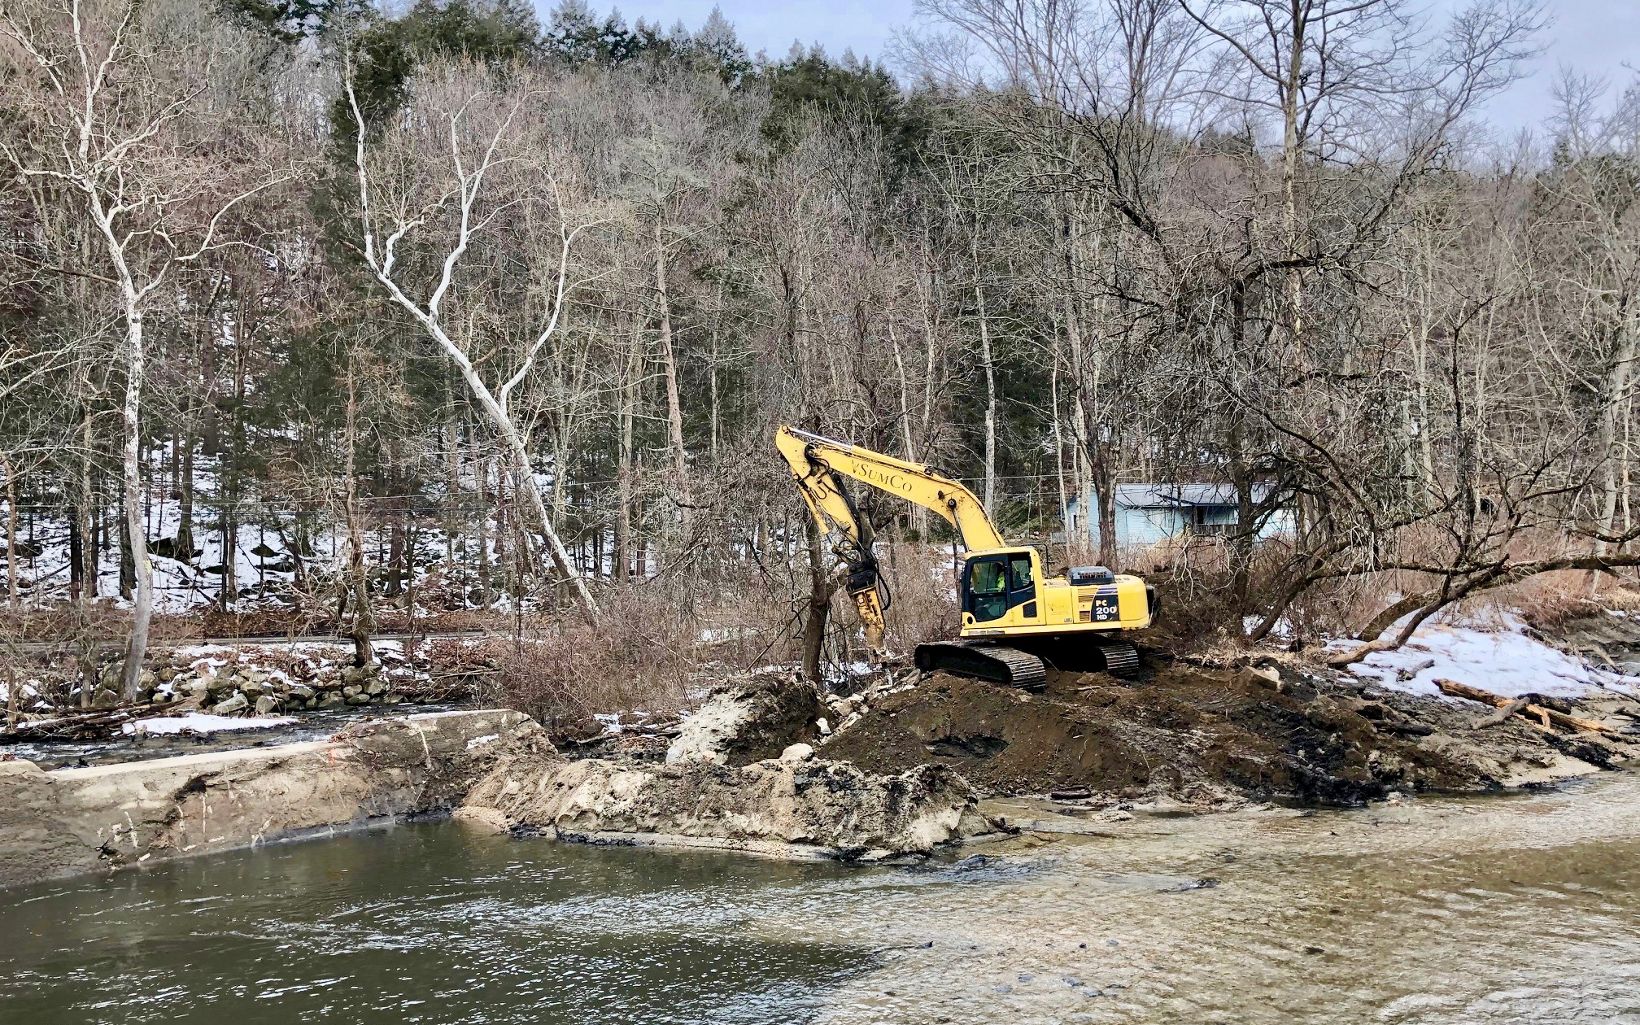 
                
                  Demolition Continues Removal of the Old Papermill Dam begins.
                  © Sally Harold/The Nature Conservancy
                
              